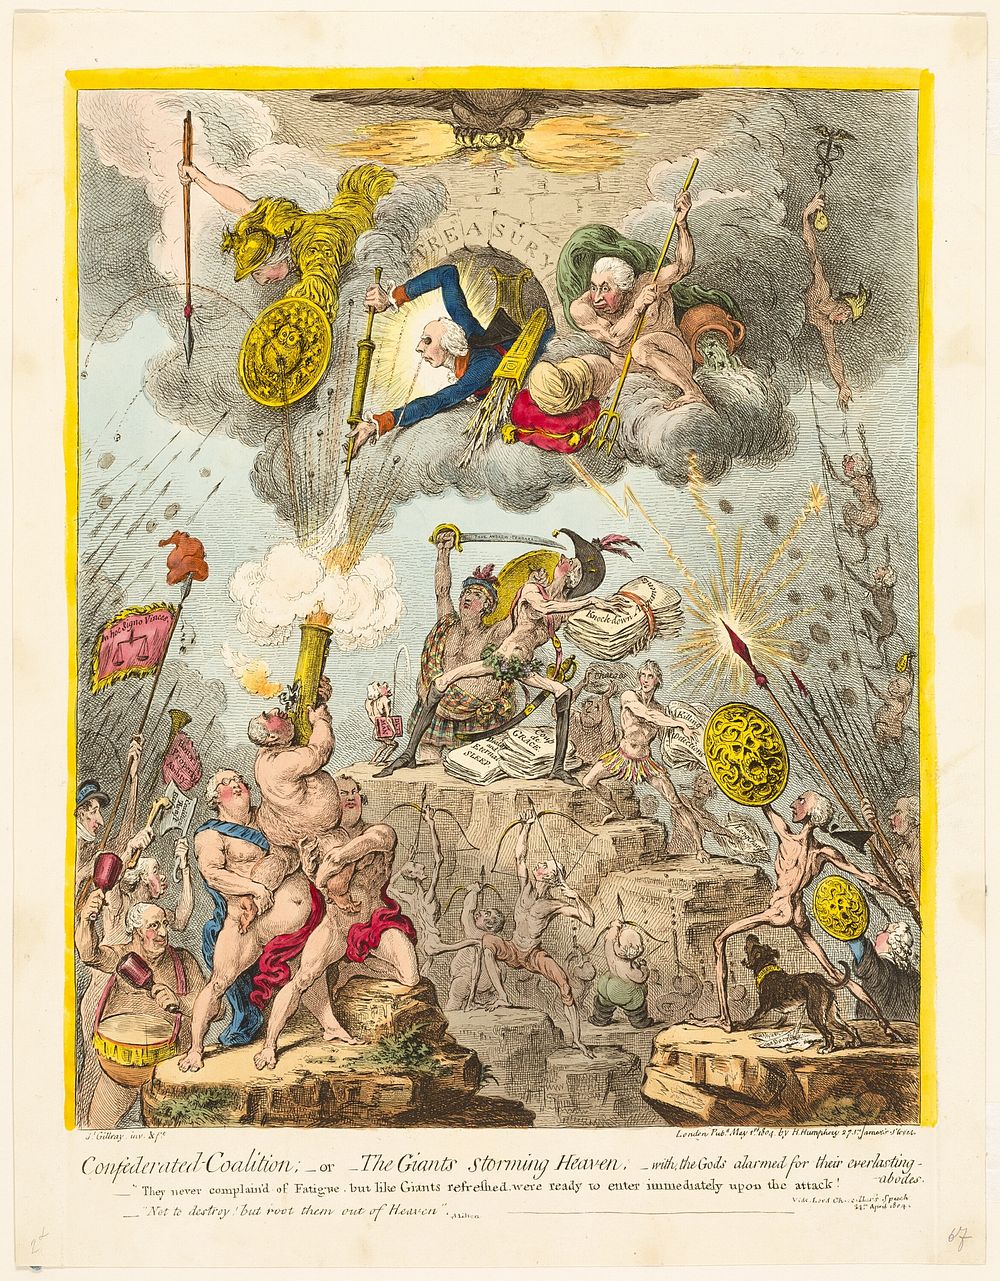 Confederated Coalition by James Gillray